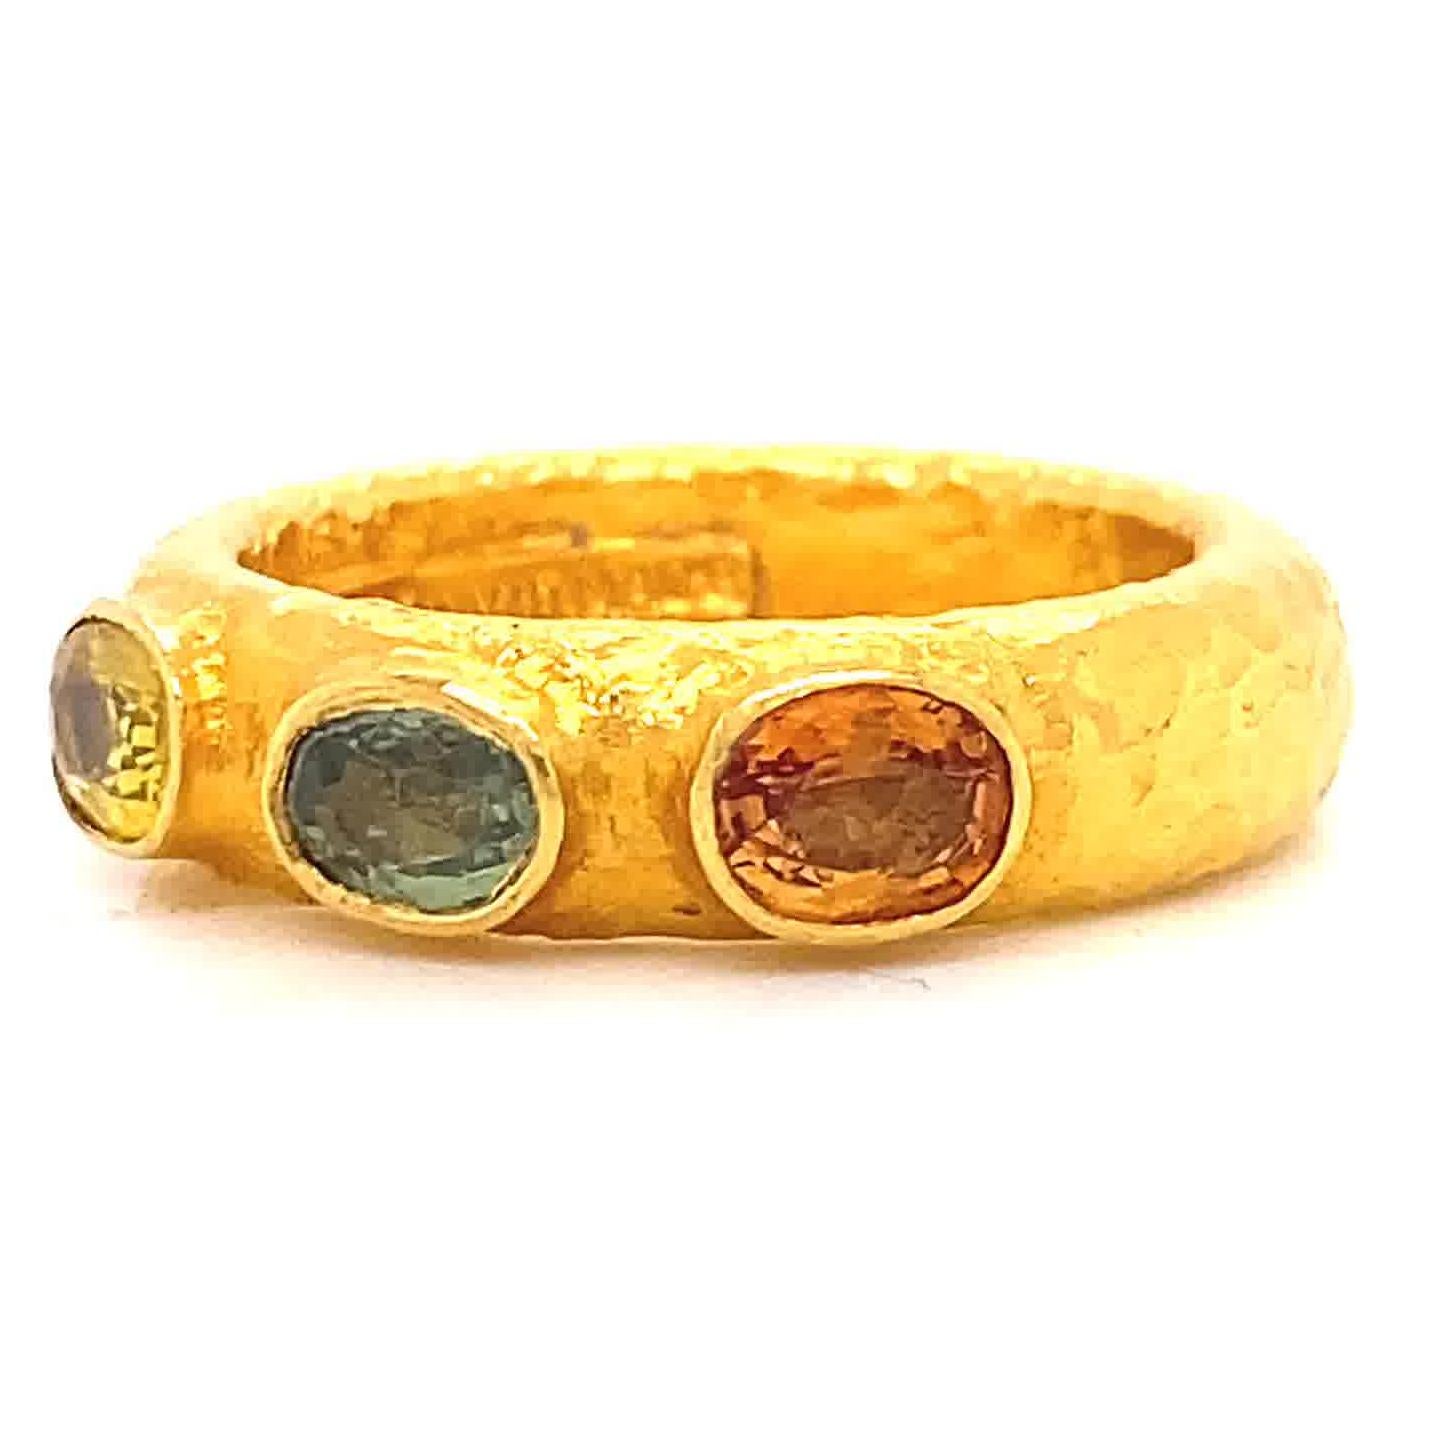 ARA985 Hand Made Sapphire Three Stone Yellow Gold Textured Ring. The three yellow, orange and blue sapphires weigh approximately 0.35 carats each. Crafted in 24k gold. Signed ARA985 hand made. Circa 2000s. Size 6 1/2 and may be re-sized.

About The